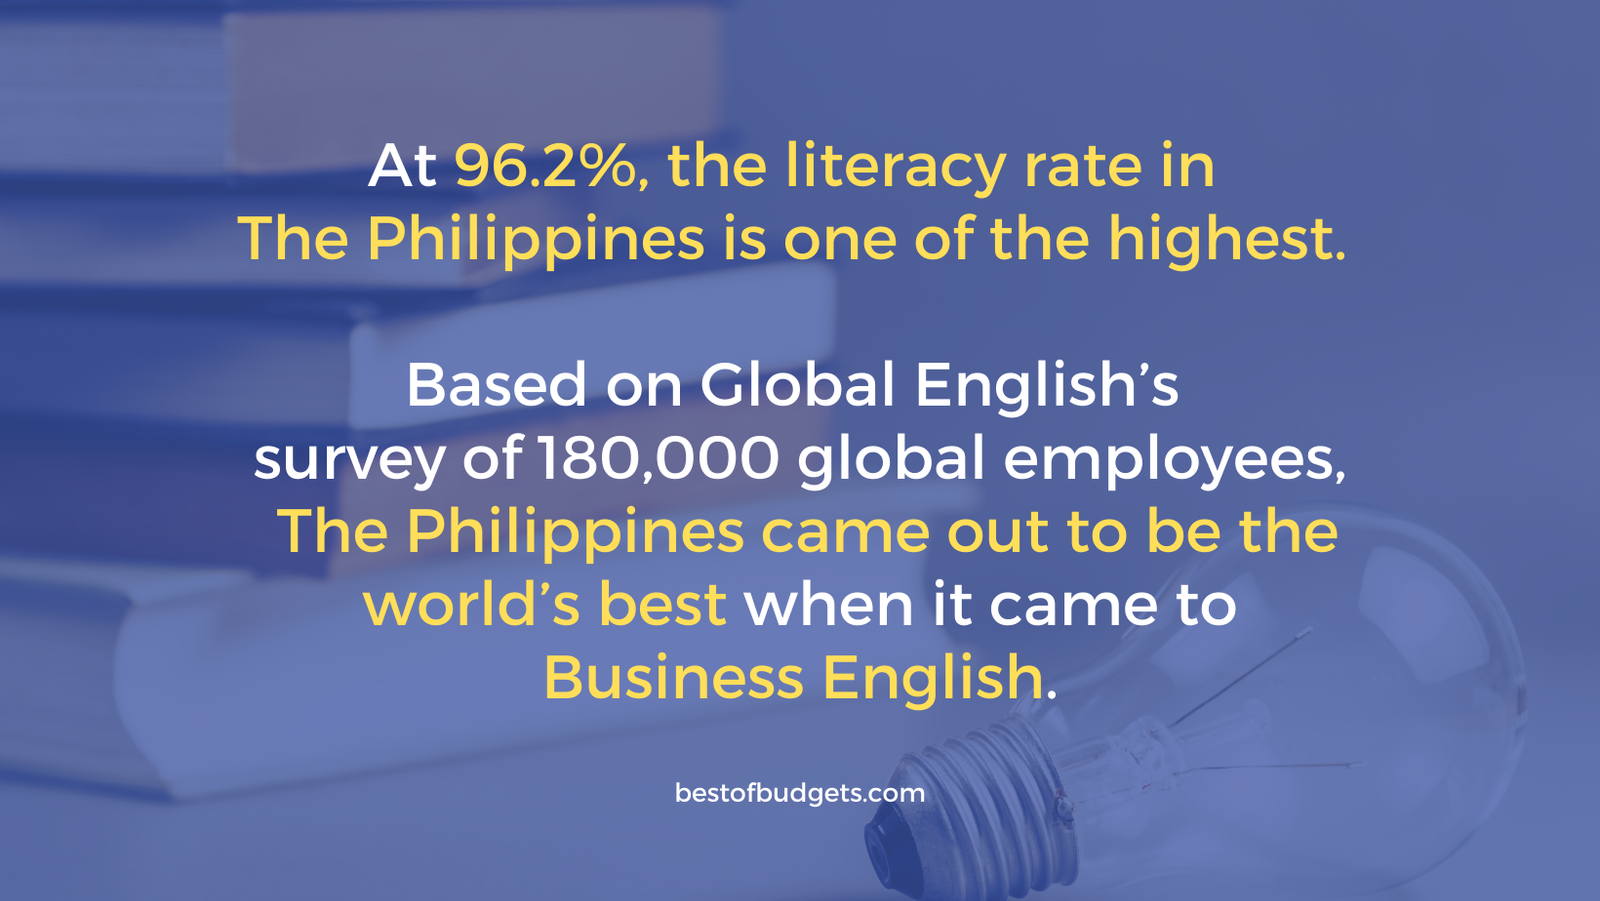 At 96.2%, the literacy rate in the Philippines is one of the highest. Based on Global English’s survey of 180,000 global employees, the Philippines came out to be the world’s best when it came to Business English.